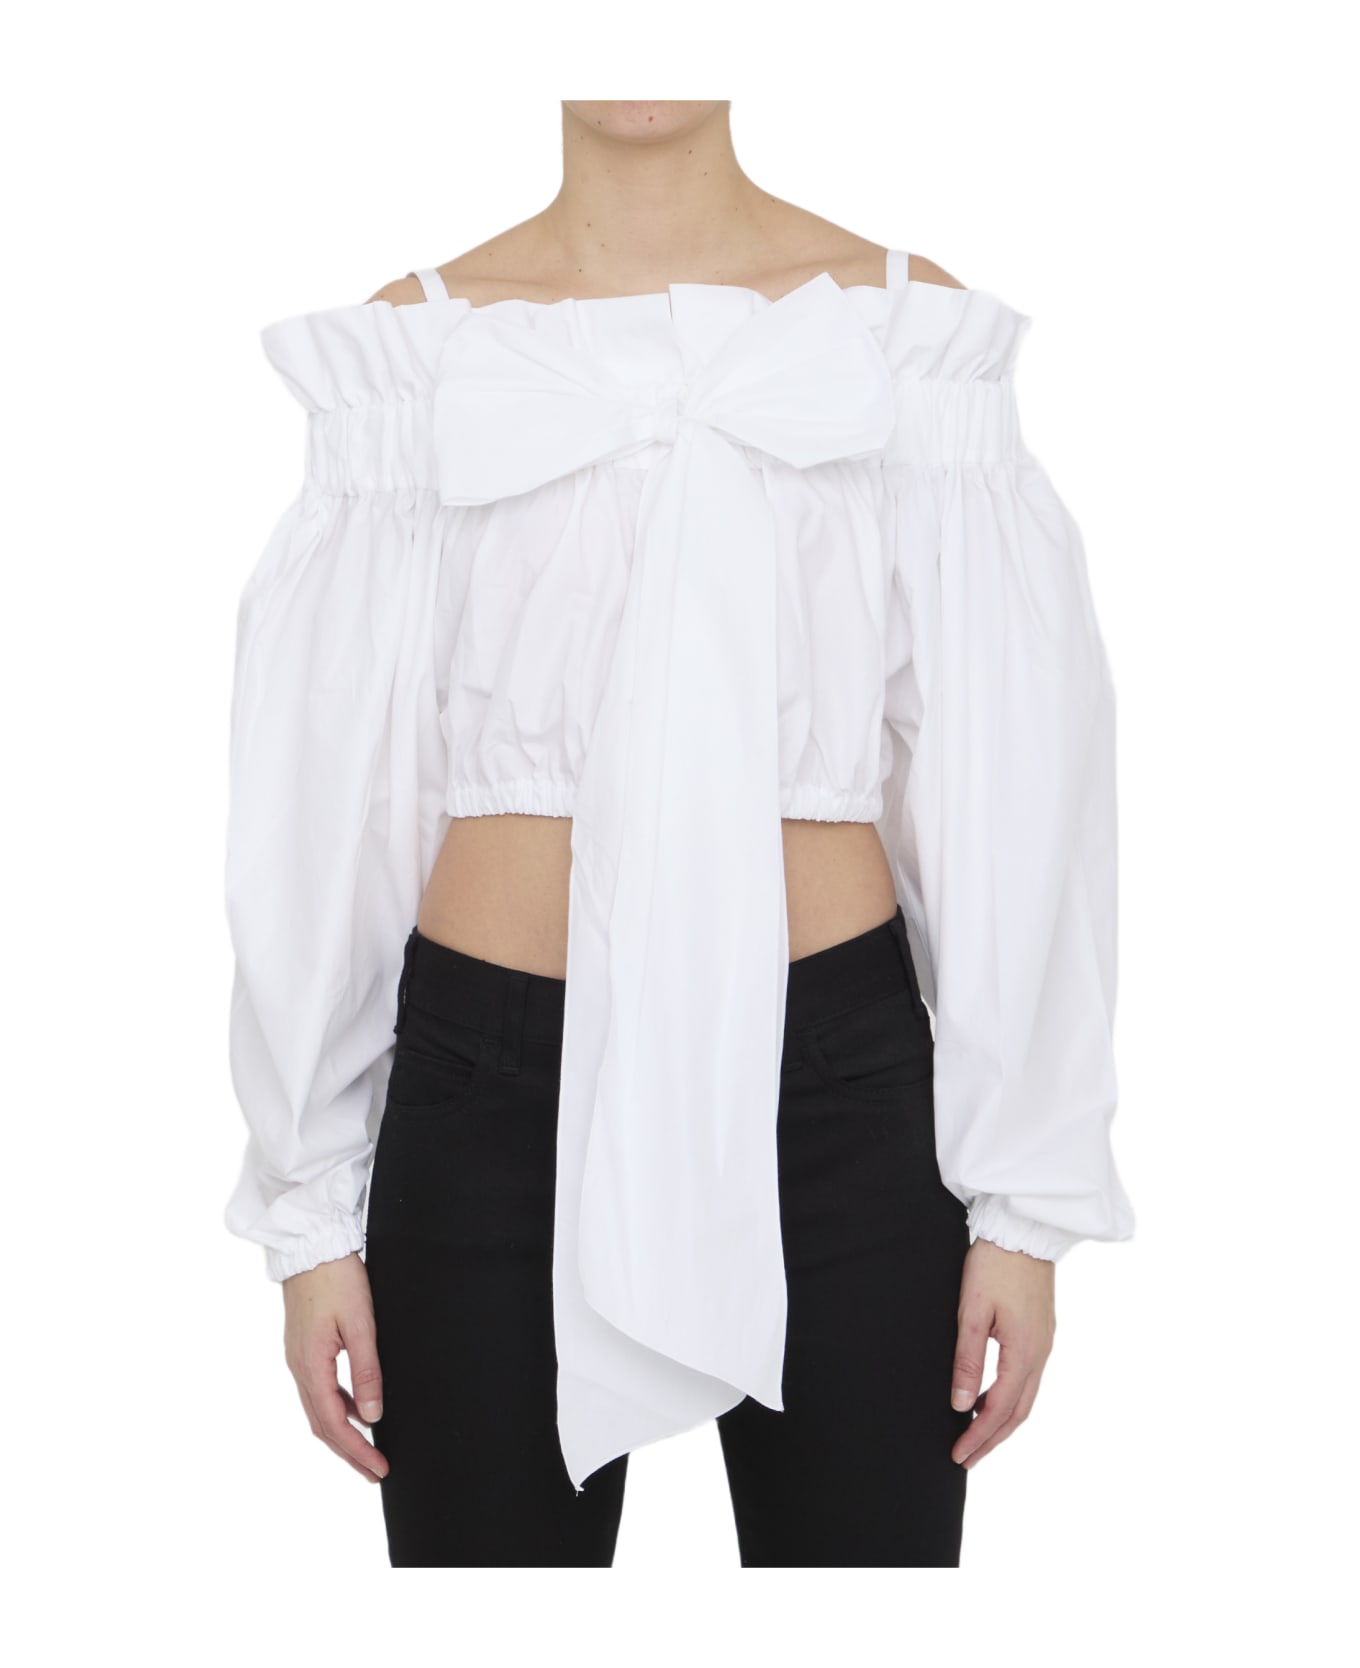 Patou Bustier Top - WHITE ブラウス